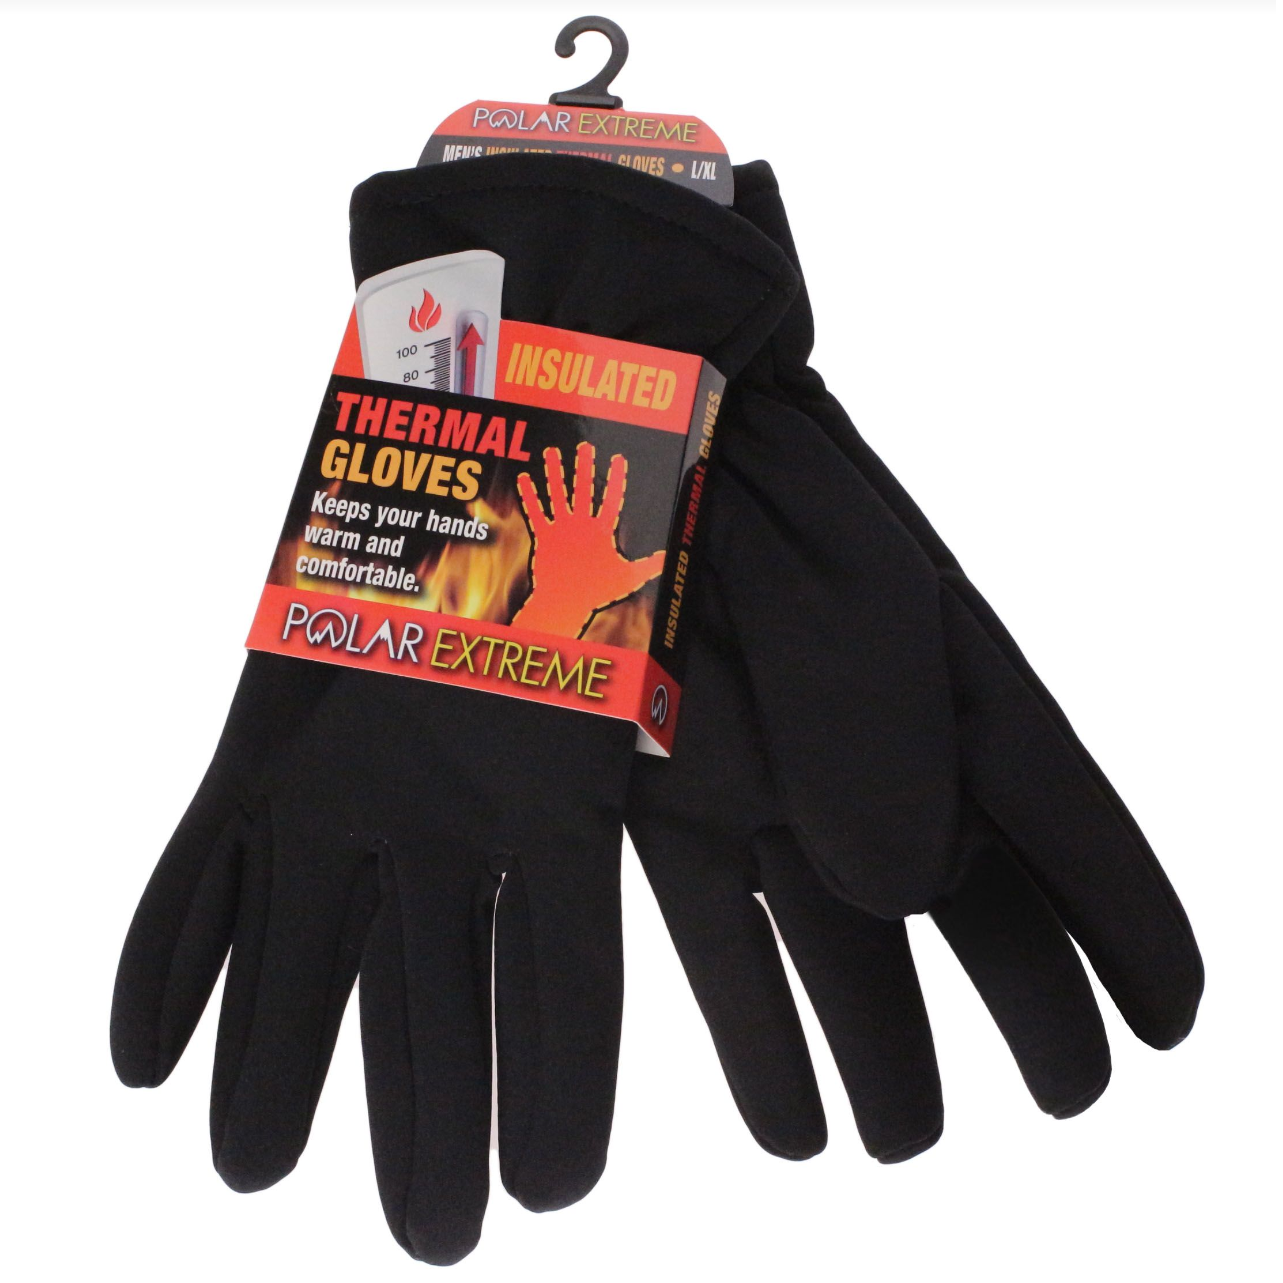 Up To 30% Off on Polar Extreme Insulated Therm